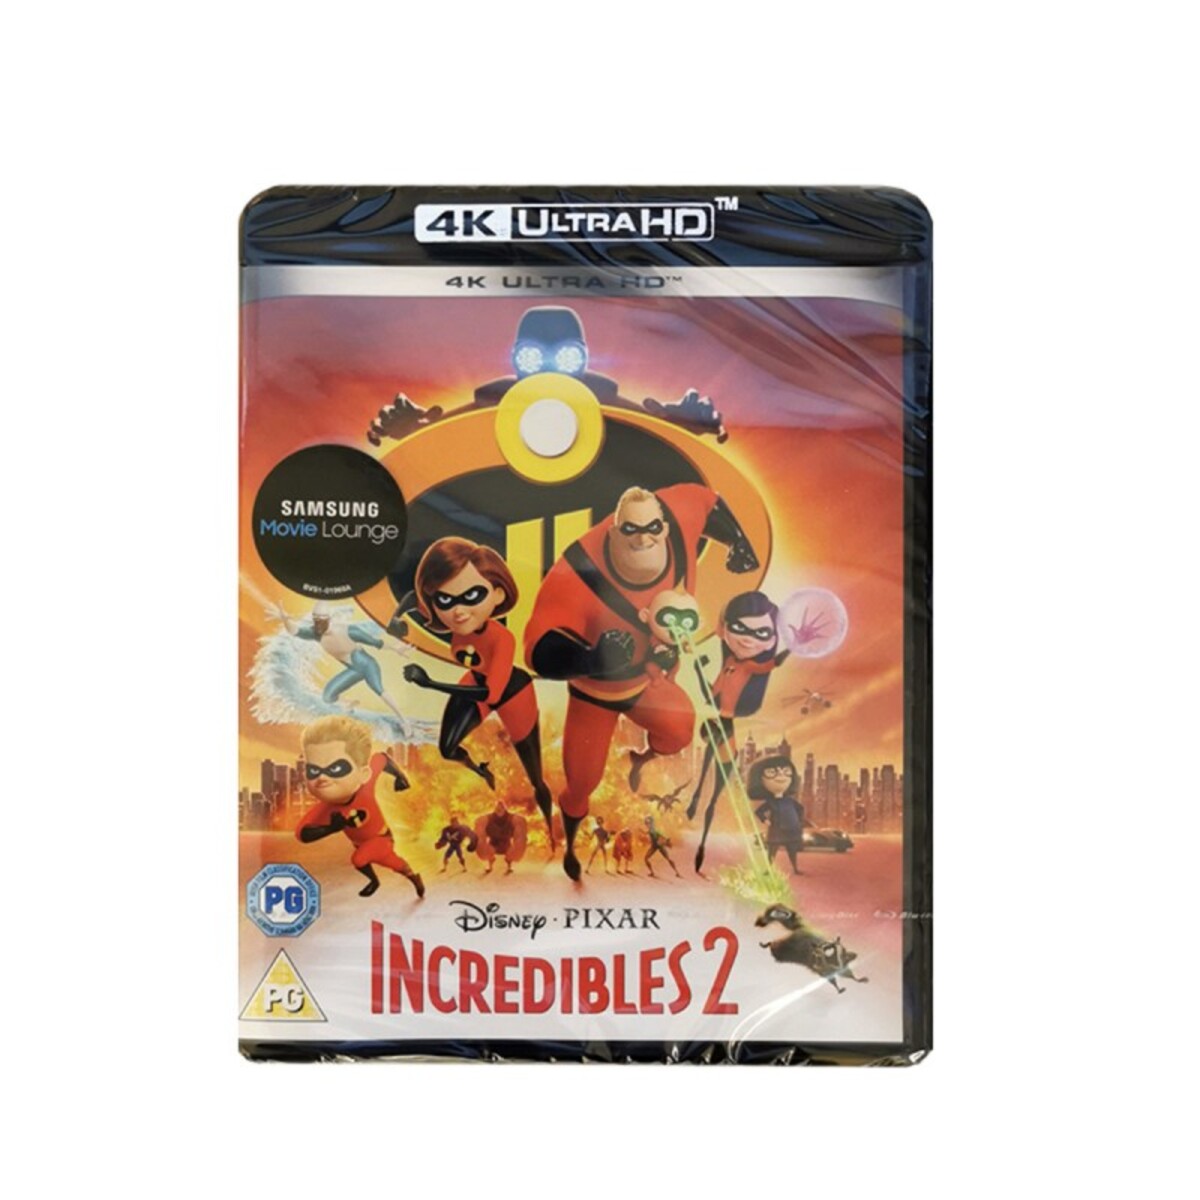 Image of 4K Incredibles 2 Blu-ray Disc